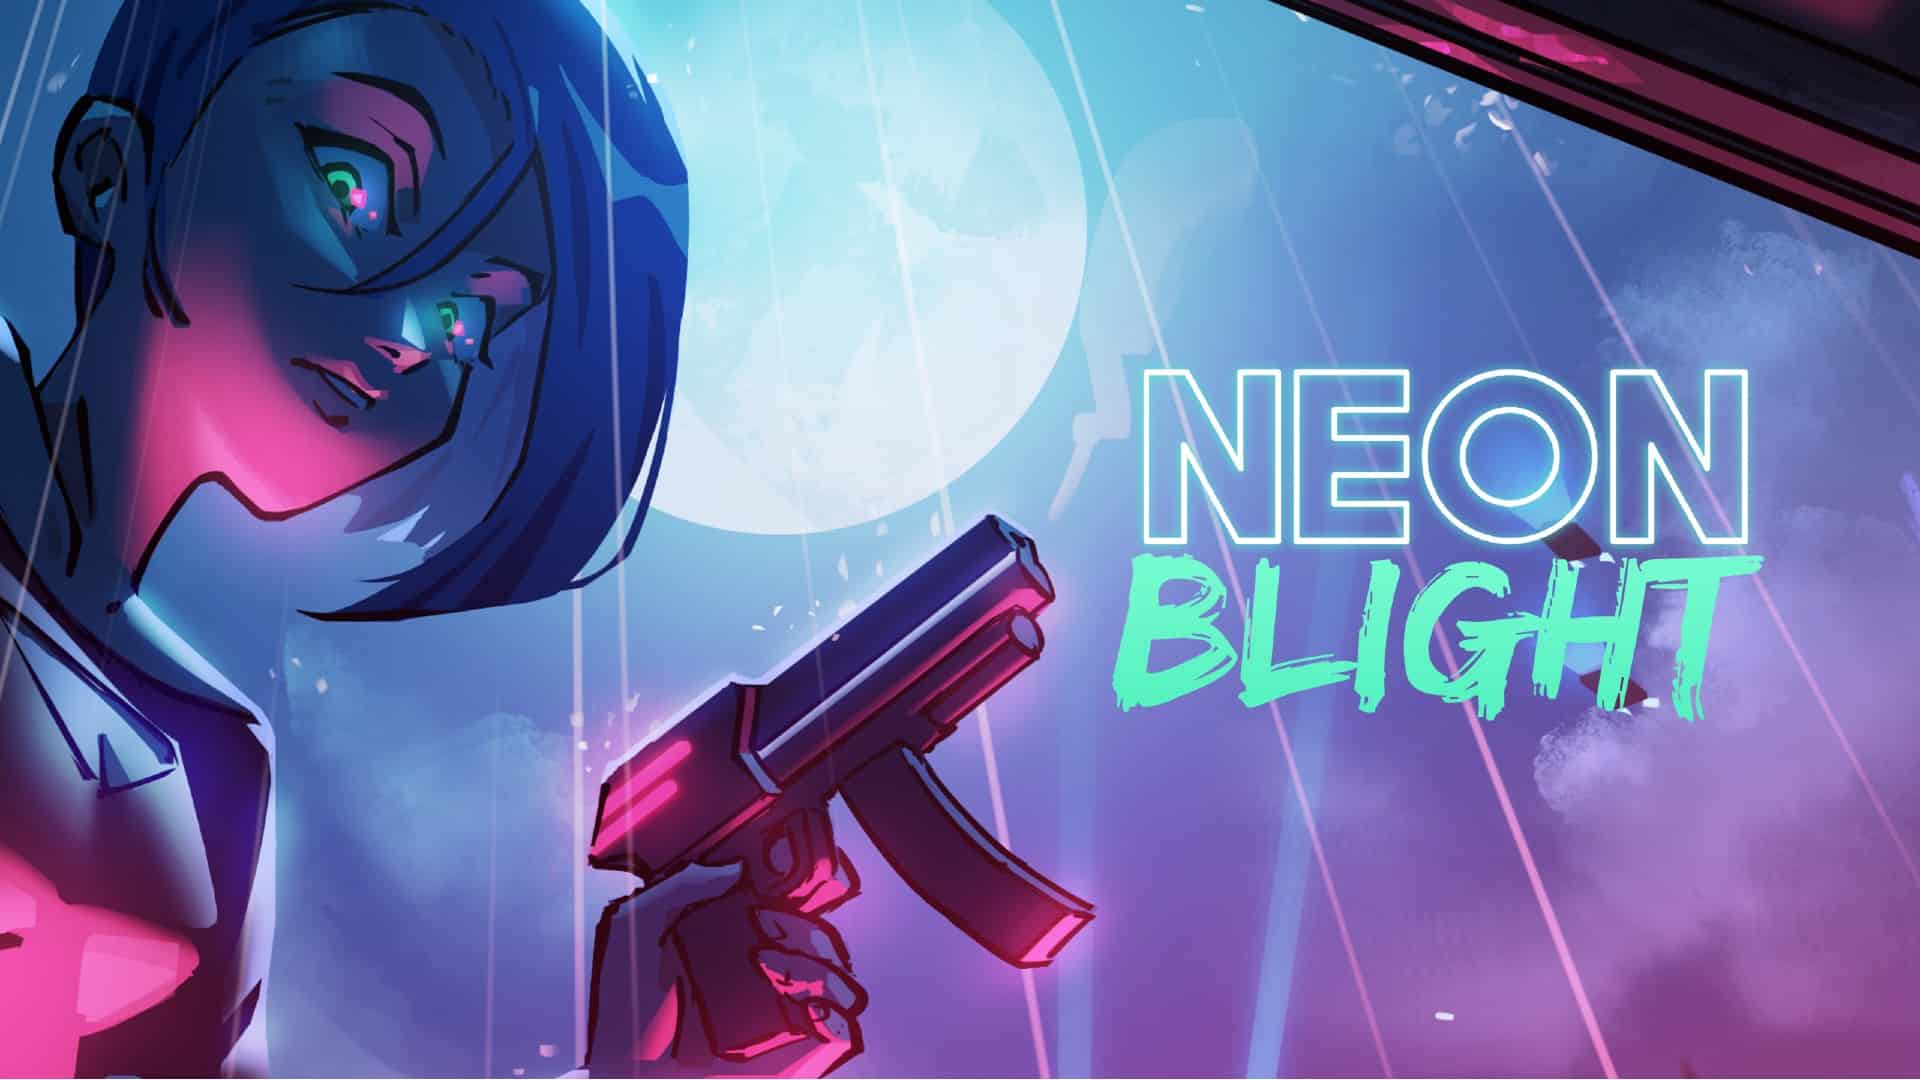 Neon Blight Review